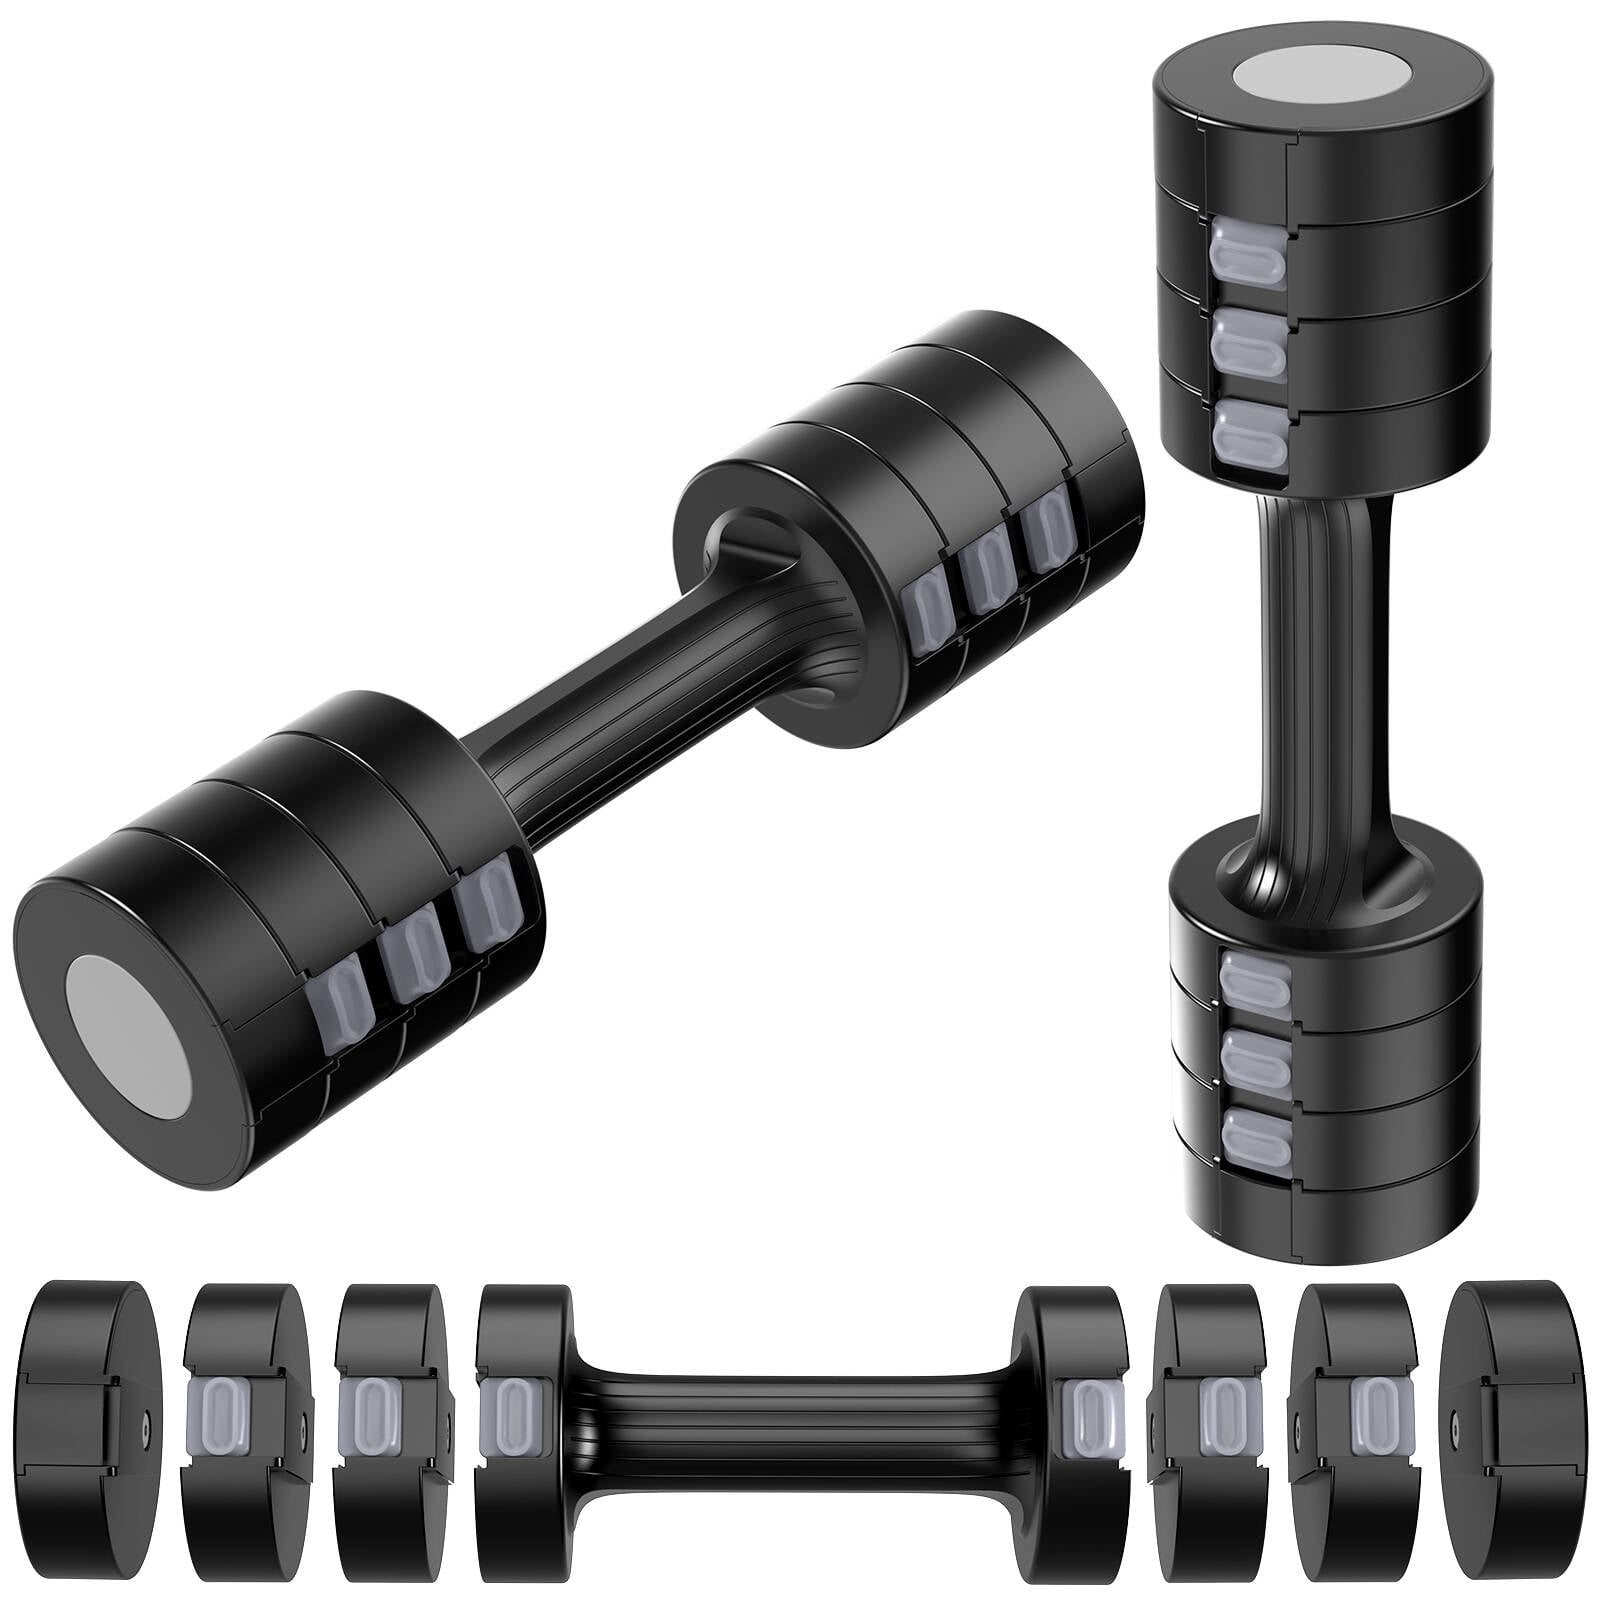 Adjustable Dumbbell Set of 2, 4 in 1 Free Weights Dumbbells Set for Women,  5lb Dumbbells Set of 2, Each 2lb 3lb 4lb 5lb with TPU Soft Rubber Handle